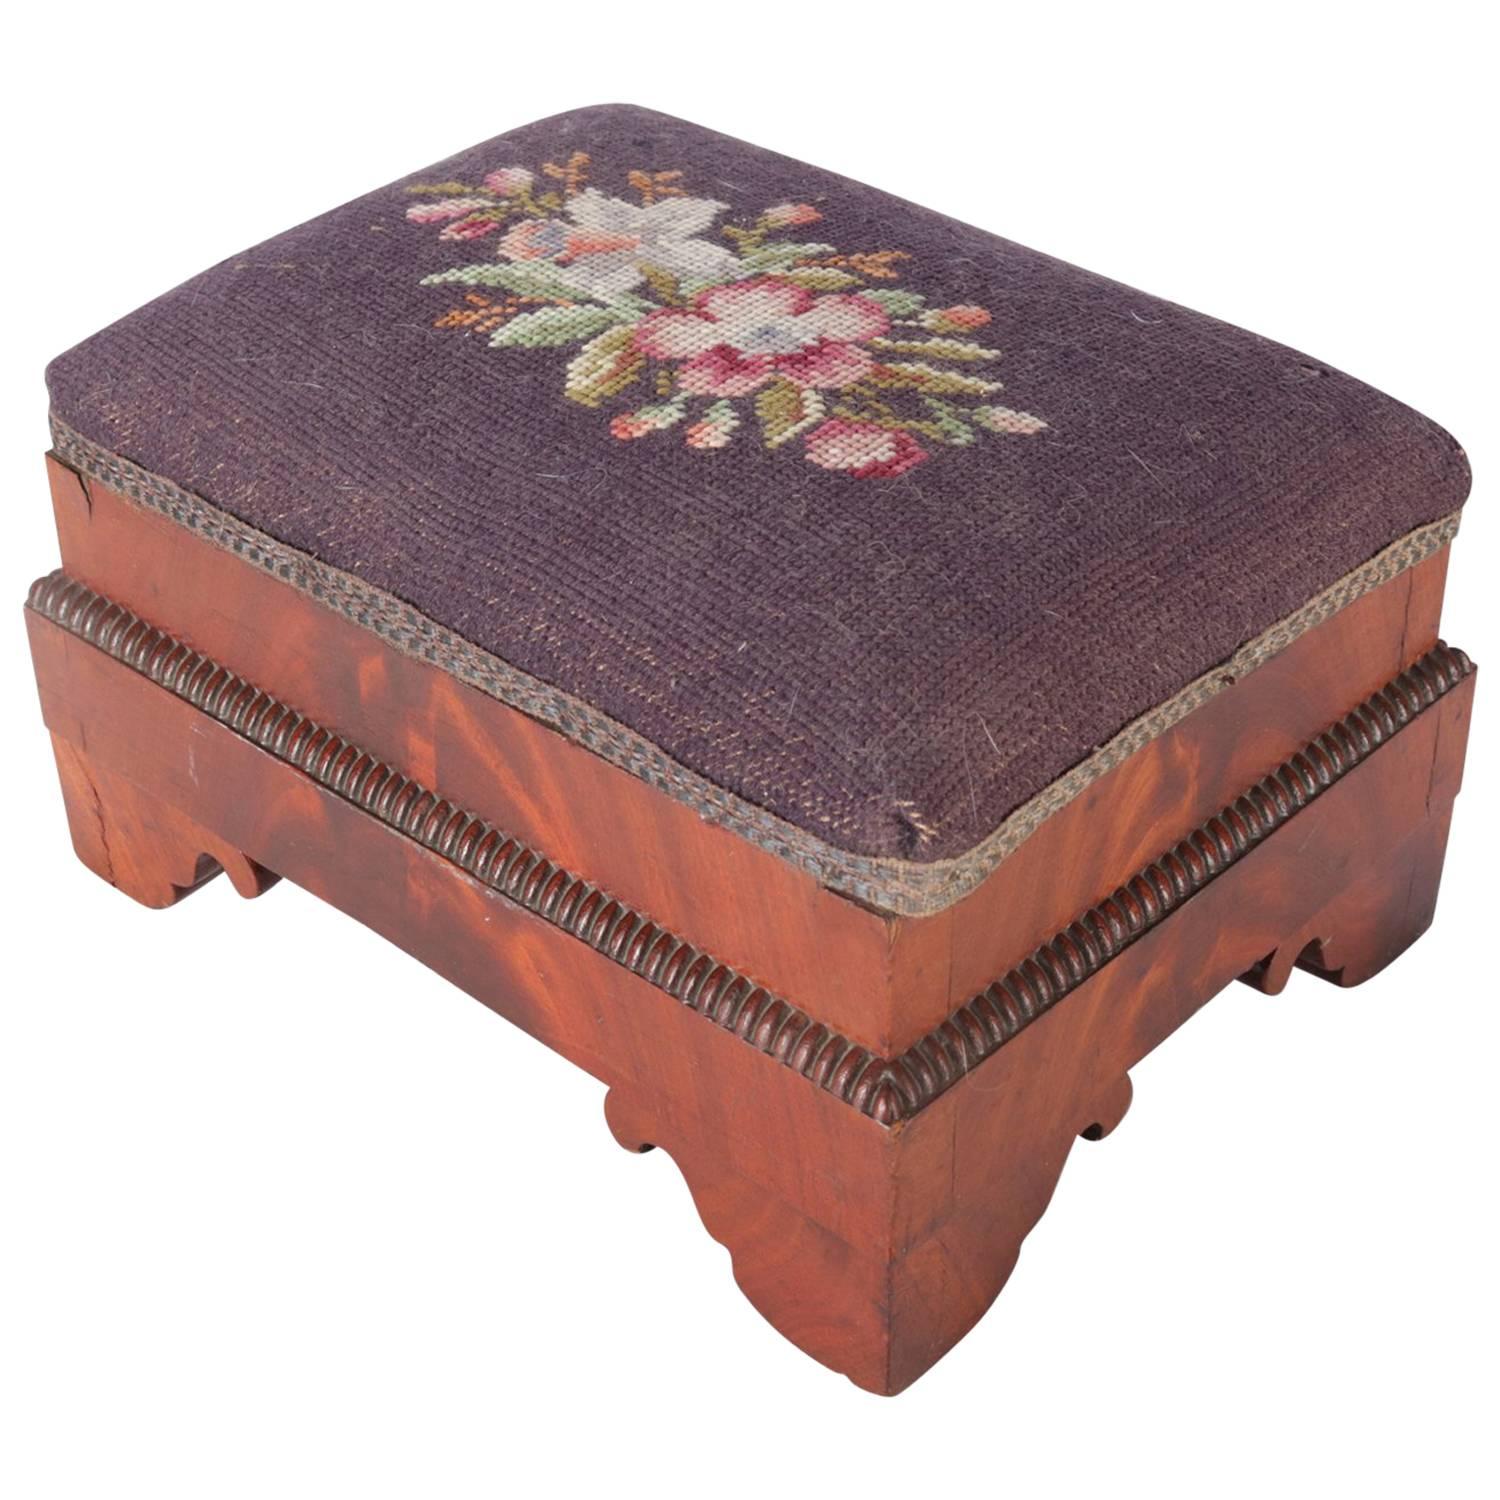 Antique American Empire Flame Mahogany Floral Needlepoint Foot Stool, circa 1850